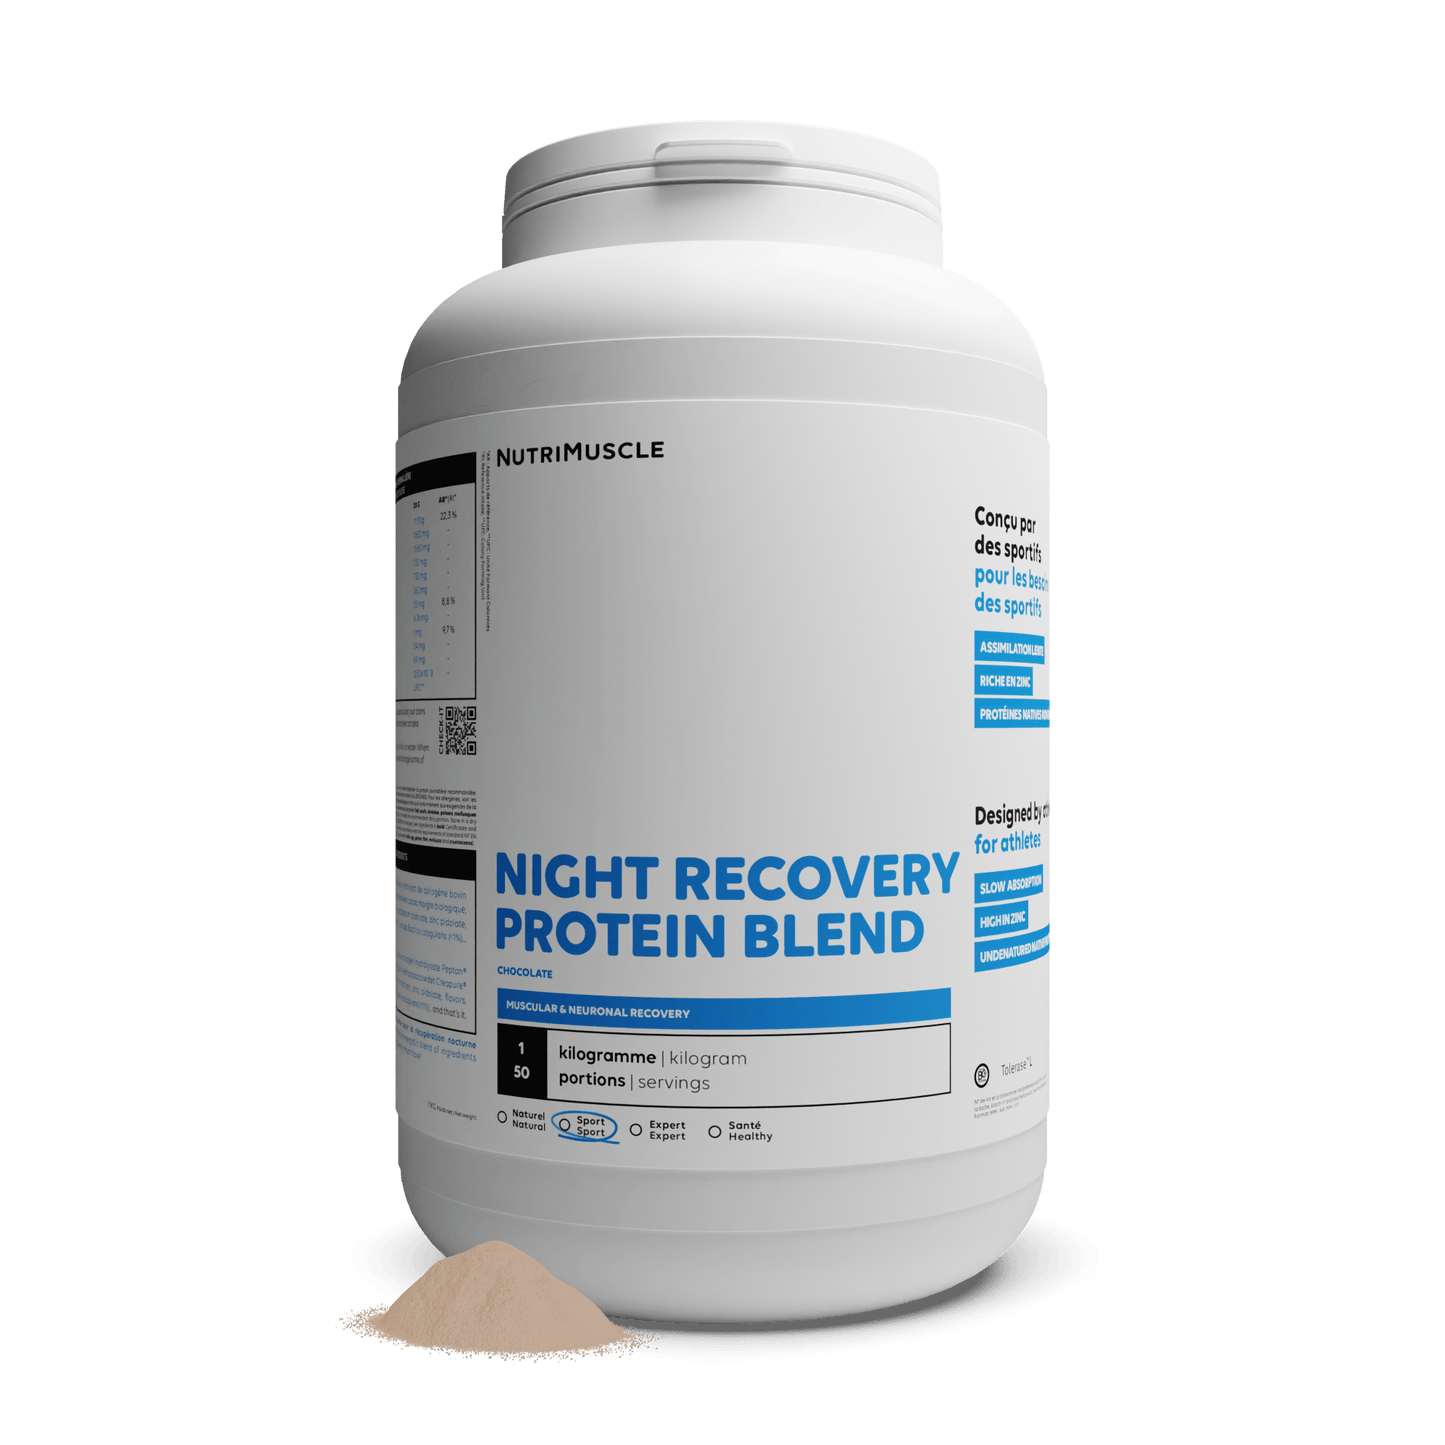 Nutrimuscle Protéines Chocolat / 1.00 kg Night Recovery Protein Blend